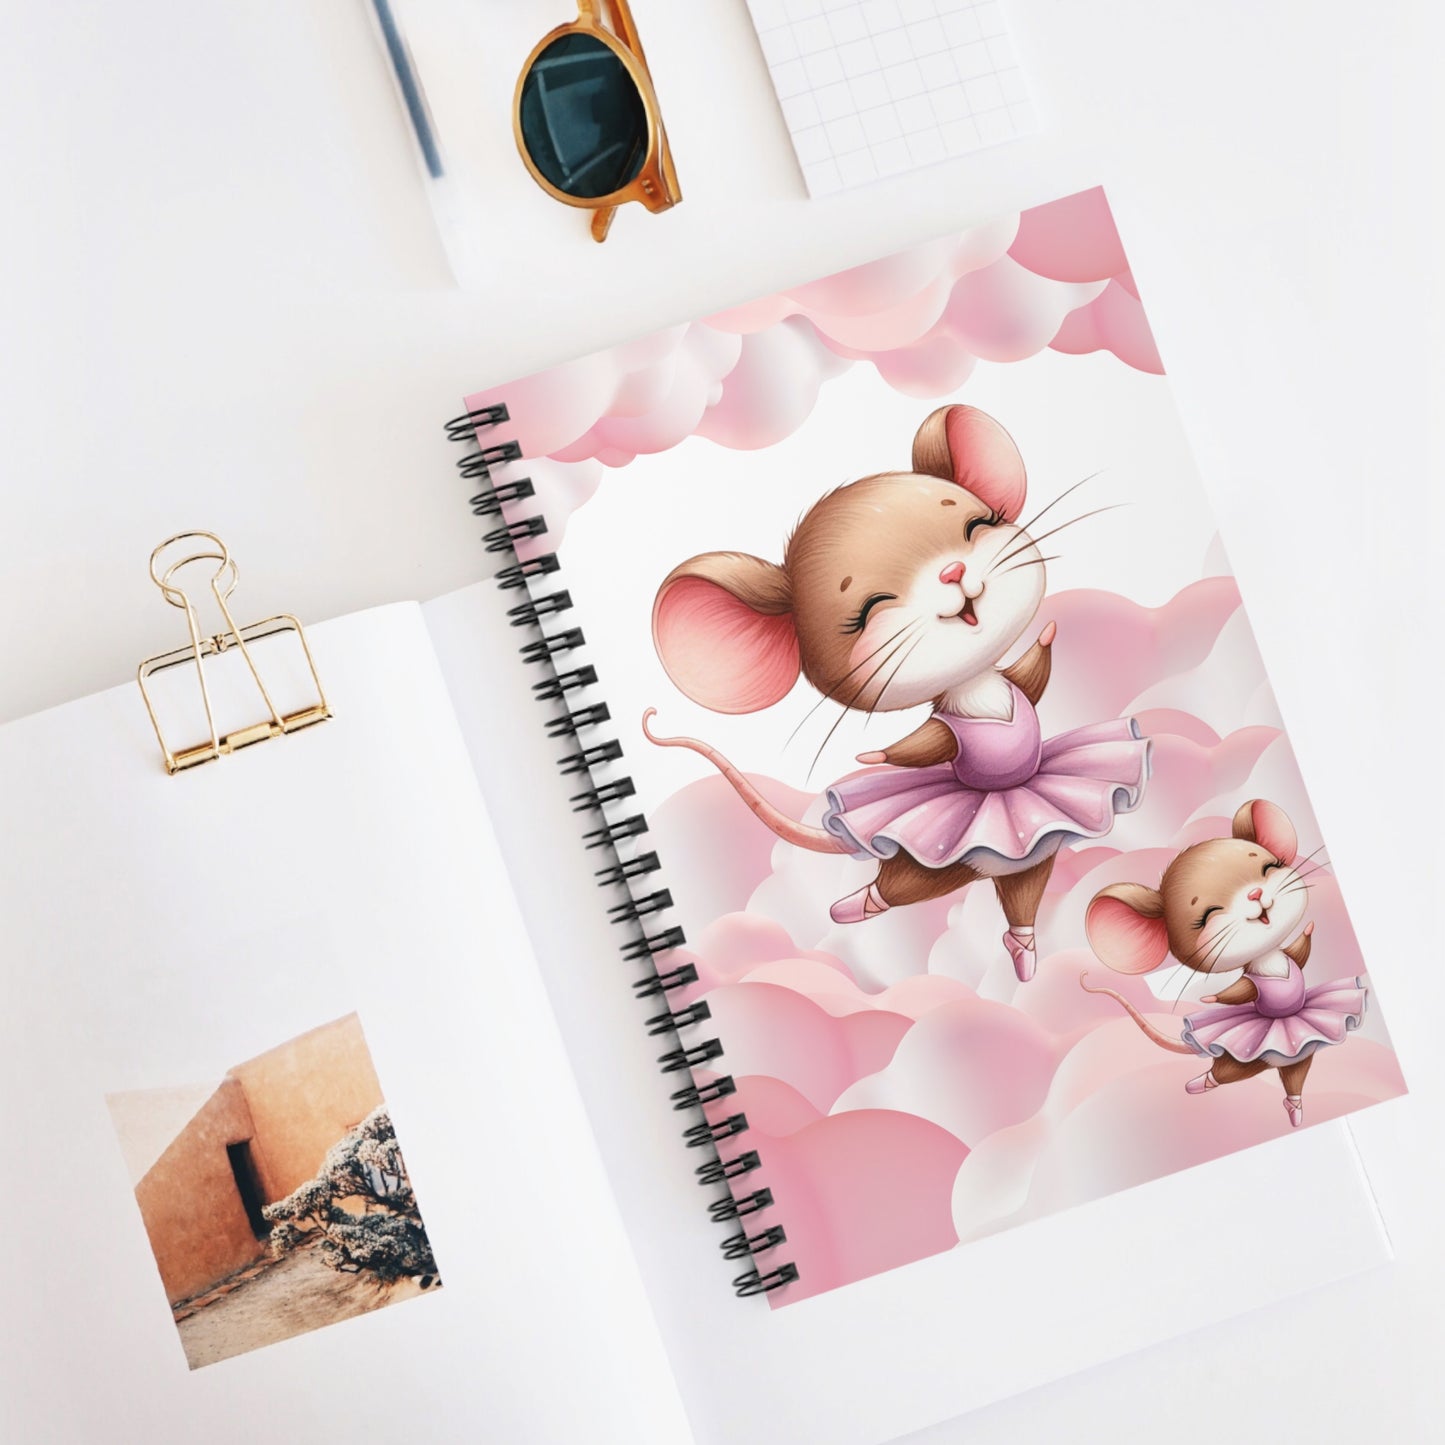 A Nony Mouse: Spiral Notebook - Log Books - Journals - Diaries - and More Custom Printed by TheGlassyLass